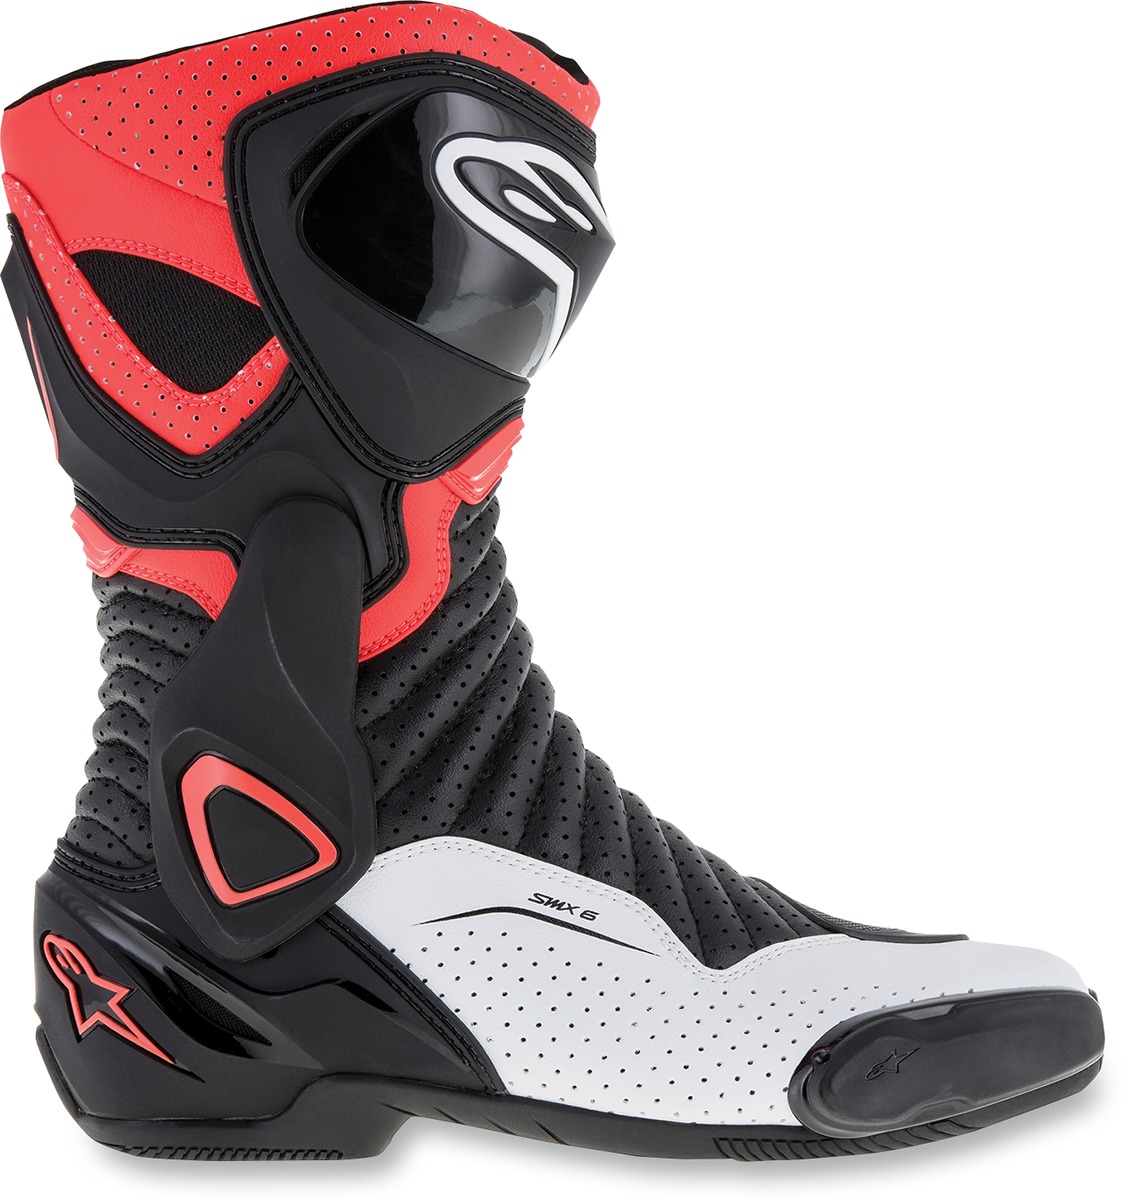 SMX-6v2 Vented Street Riding Boots Black/Red/White US 4 - Click Image to Close